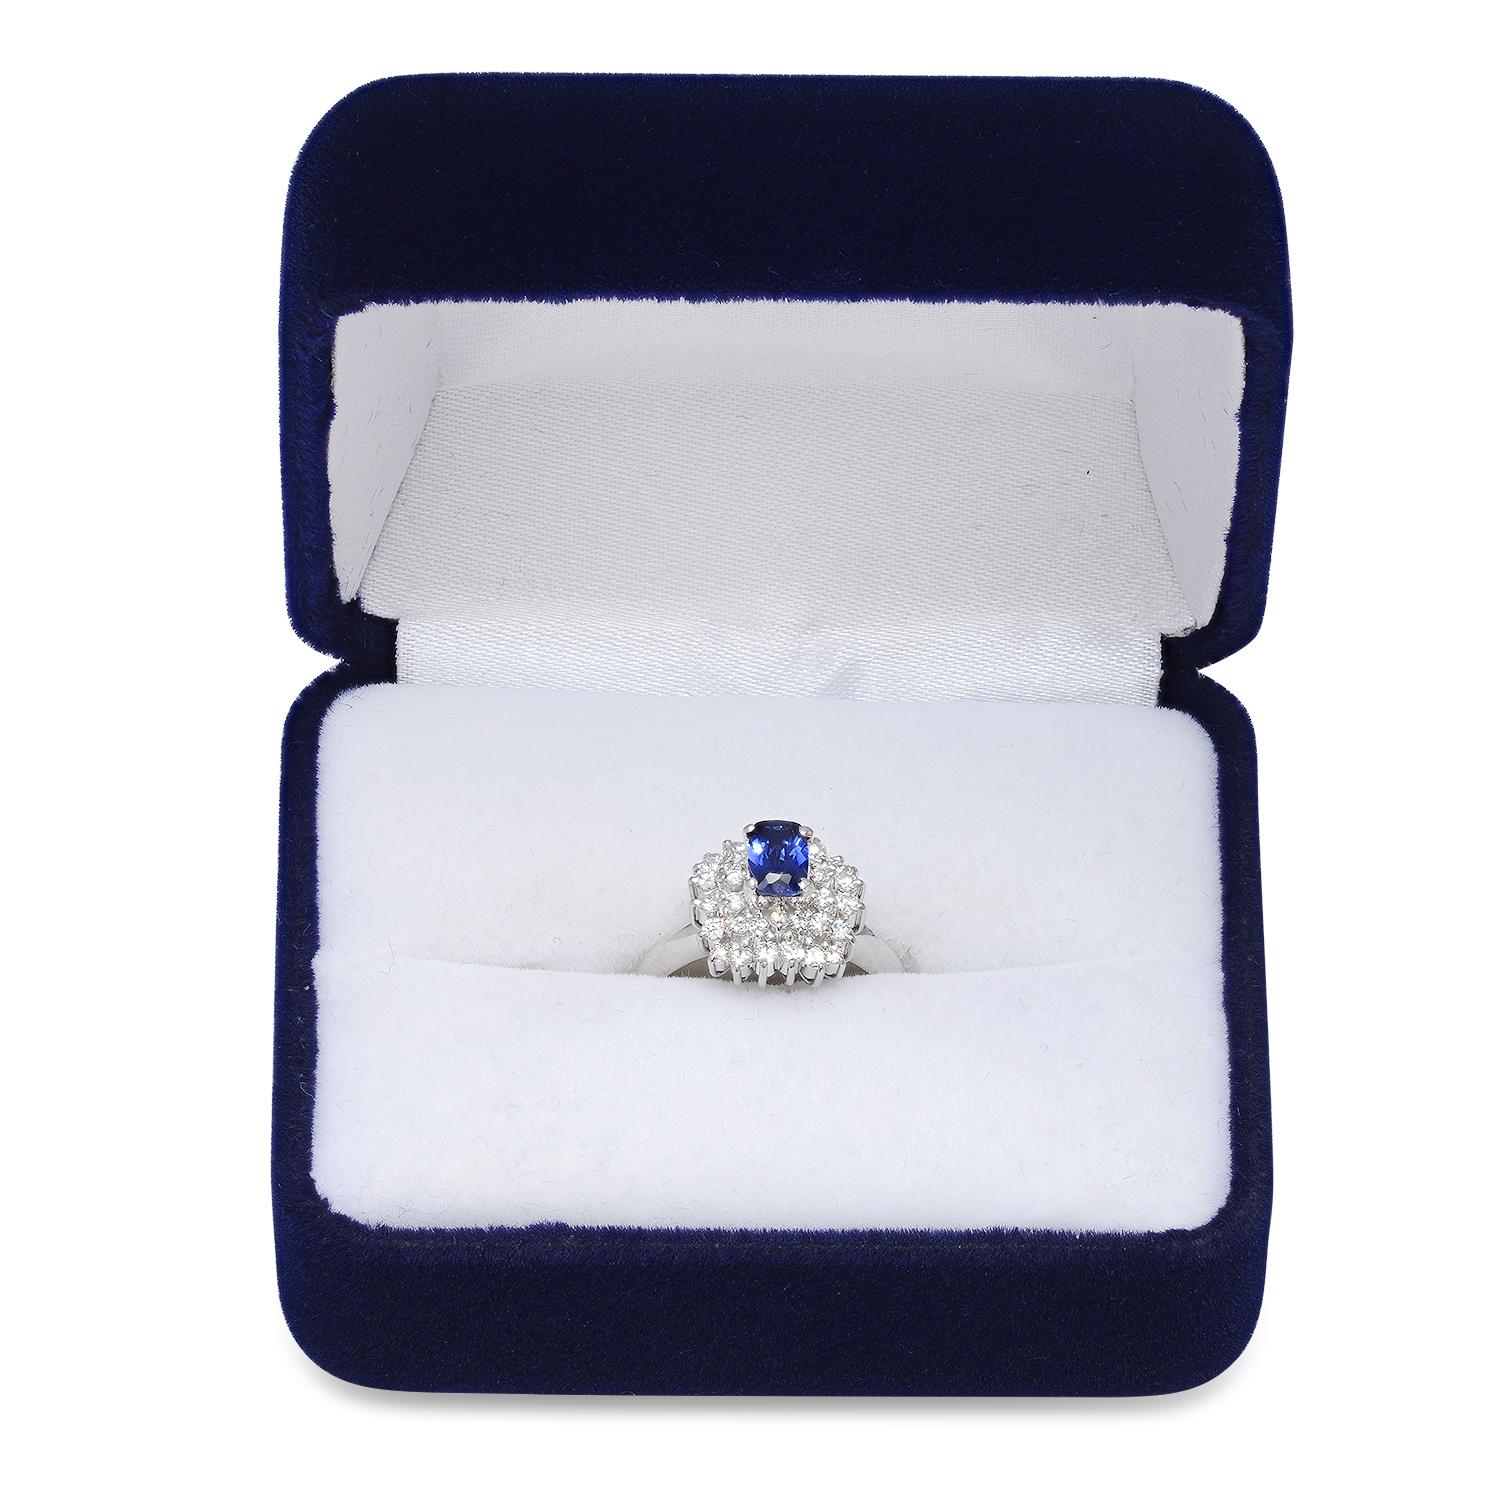 Platinum Setting with 0.34ct Sapphire and 0.50ct Diamond Ring